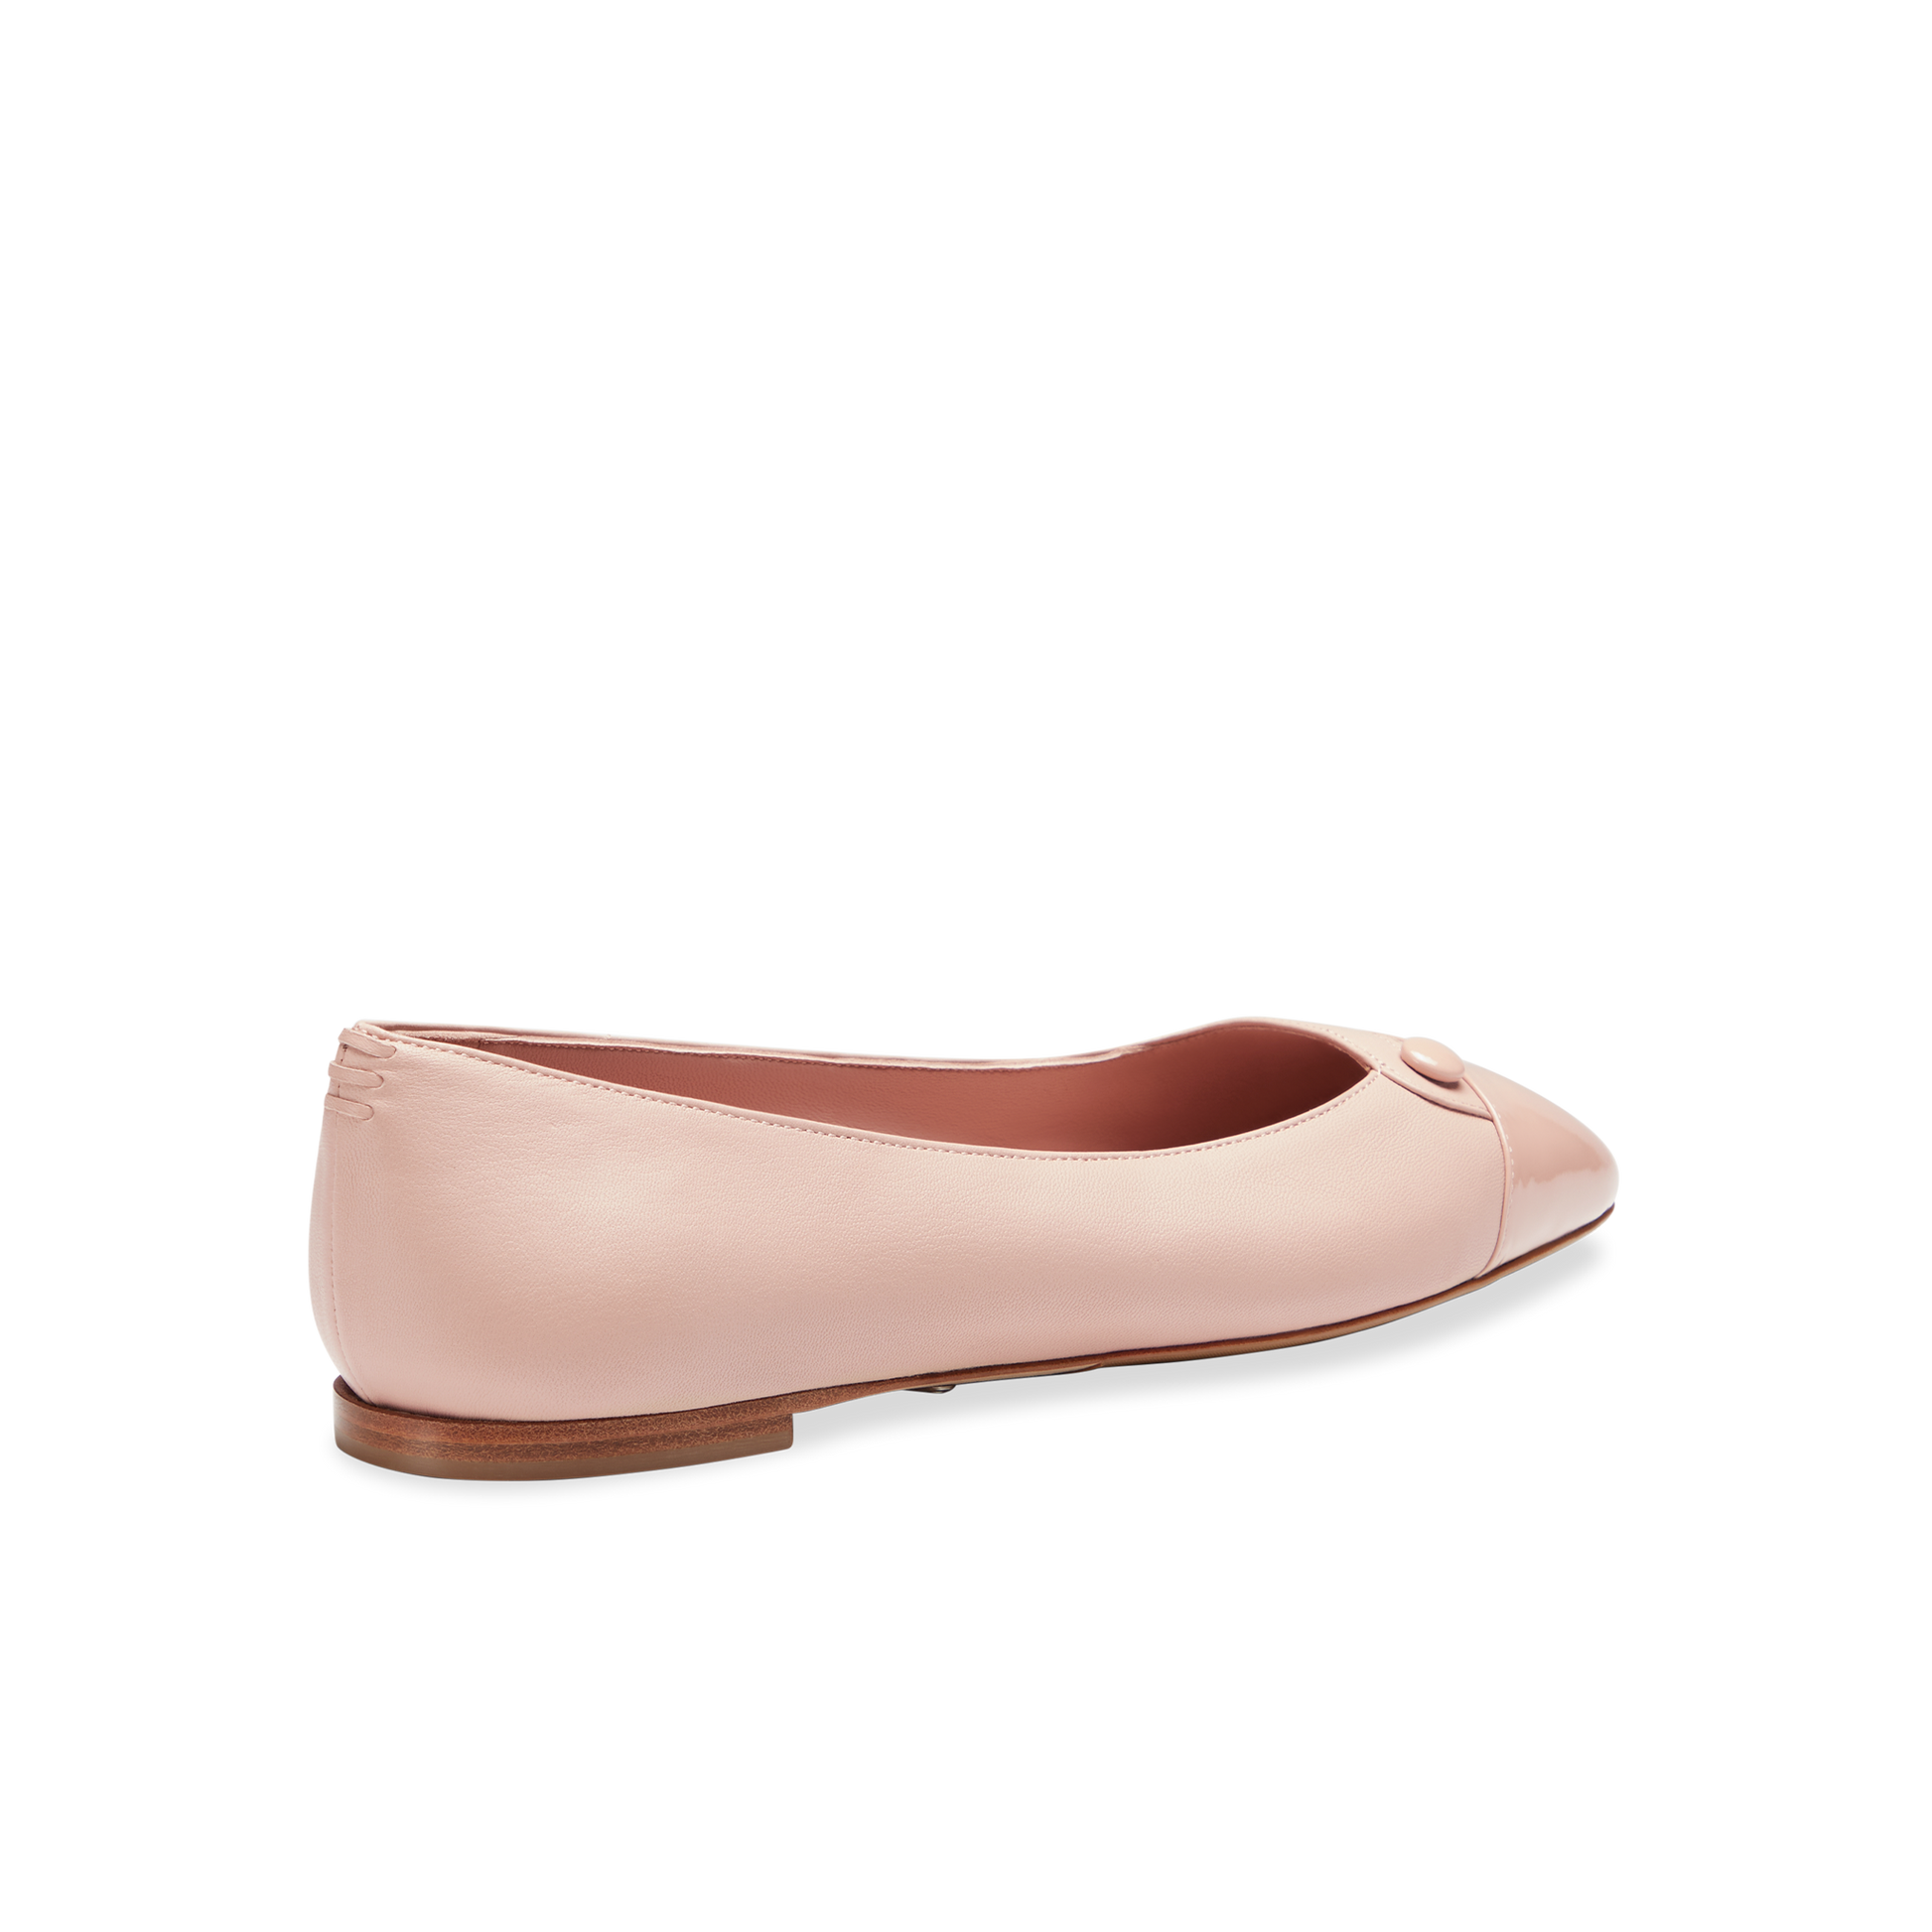 Sarah Flint Sacchetto Ballet Flat | Pink Flats for Women | Petal Nappa & Patent | Luxurious Comfortable Designer Shoes Handcrafted in Italy